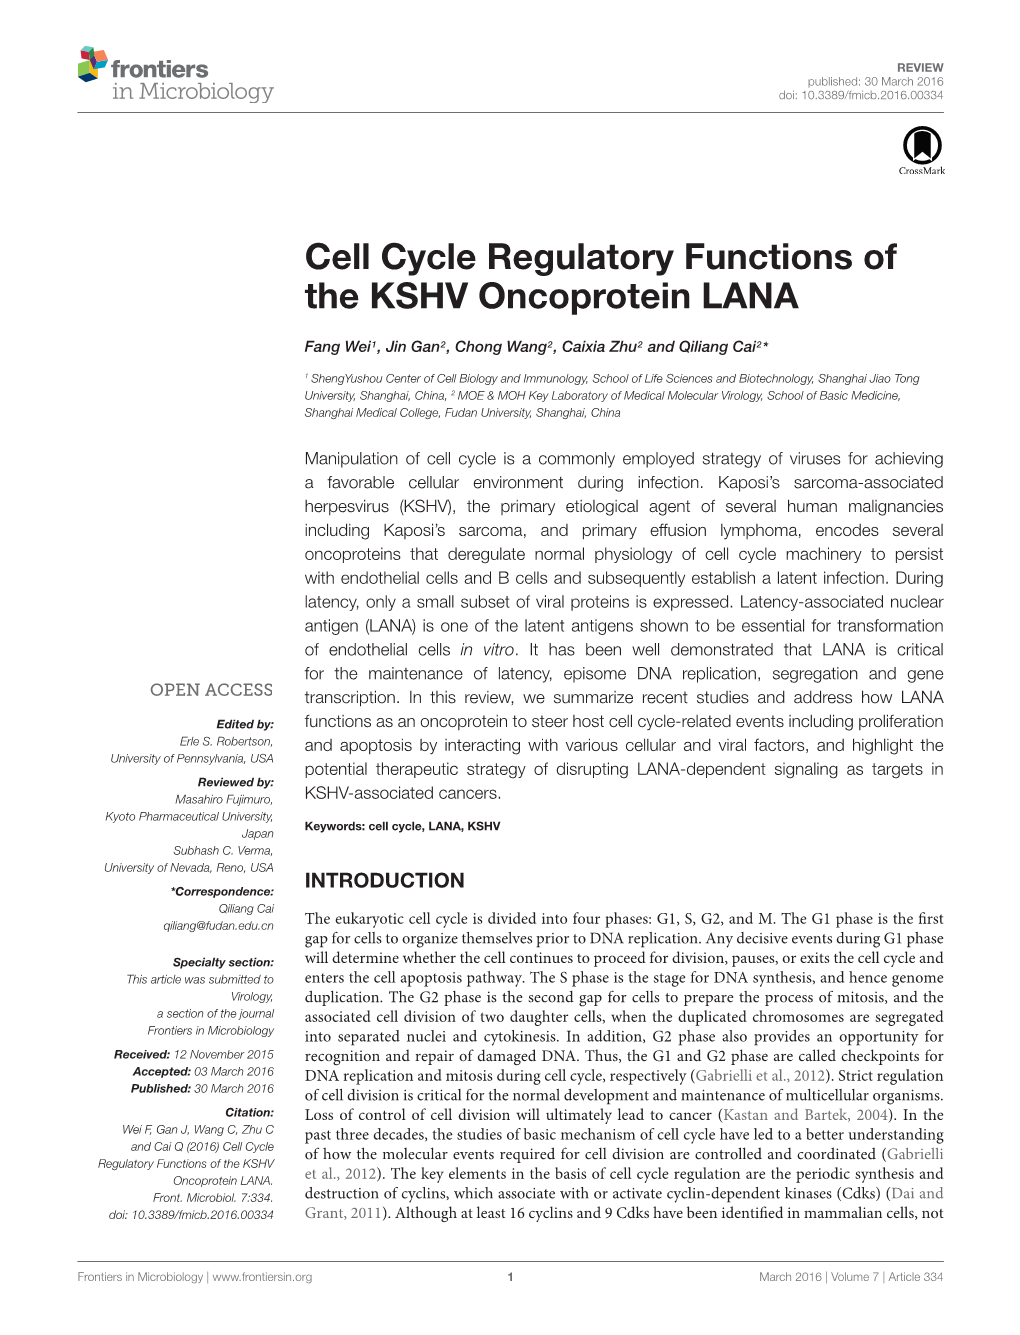 Cell Cycle Regulatory Functions of the KSHV Oncoprotein LANA